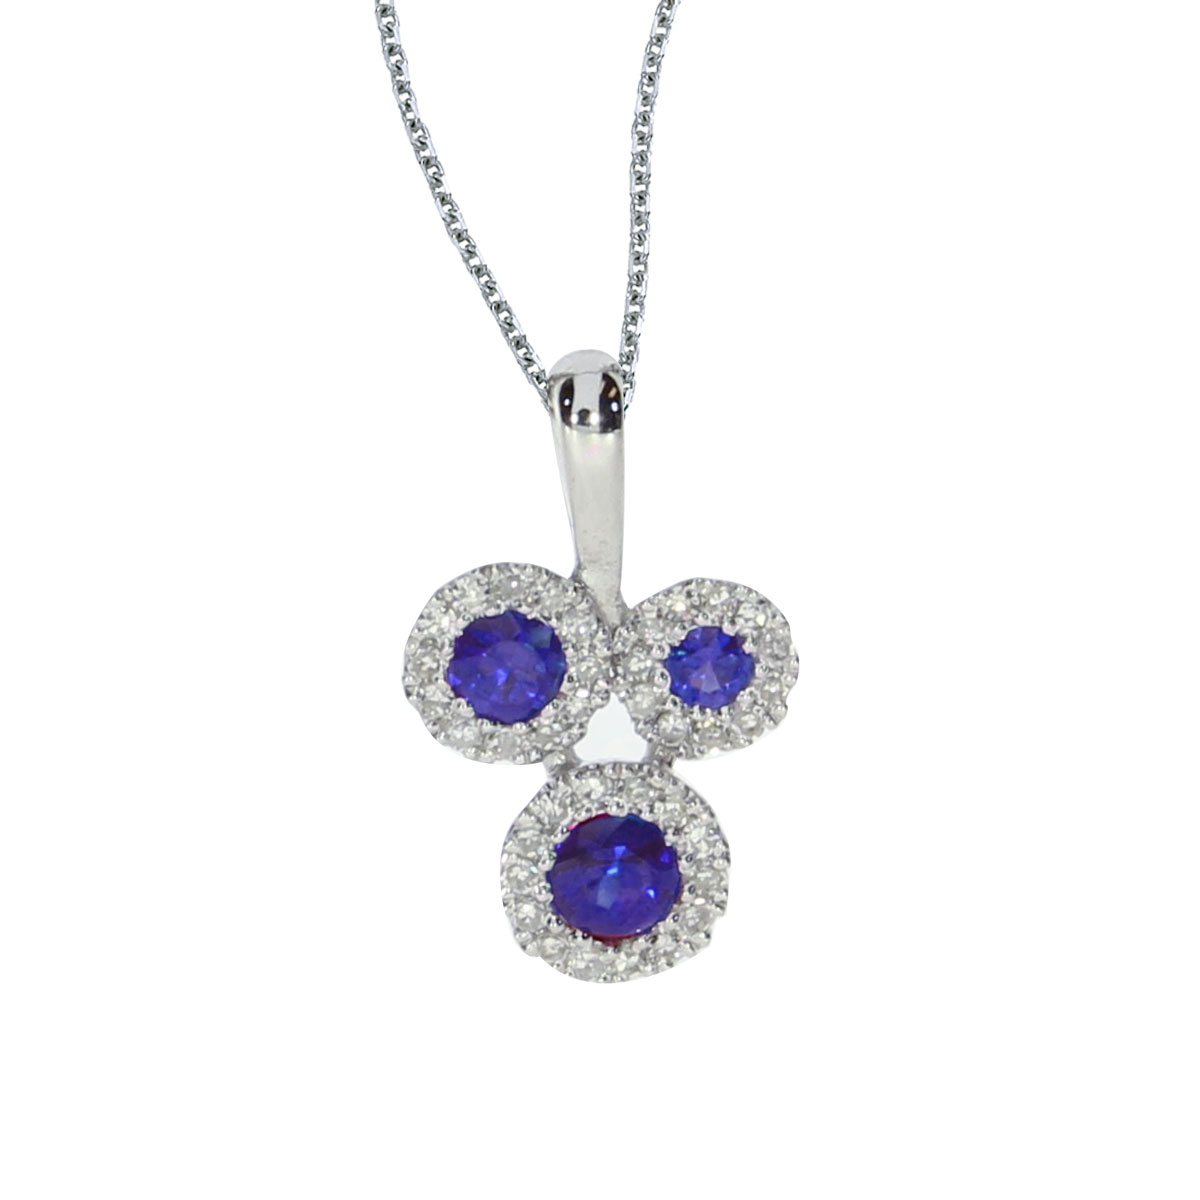 JCX2614: This 14k white gold pendant contains three 2.8 mm sapphires surrounded by .07 carats of shimmering diamonds.